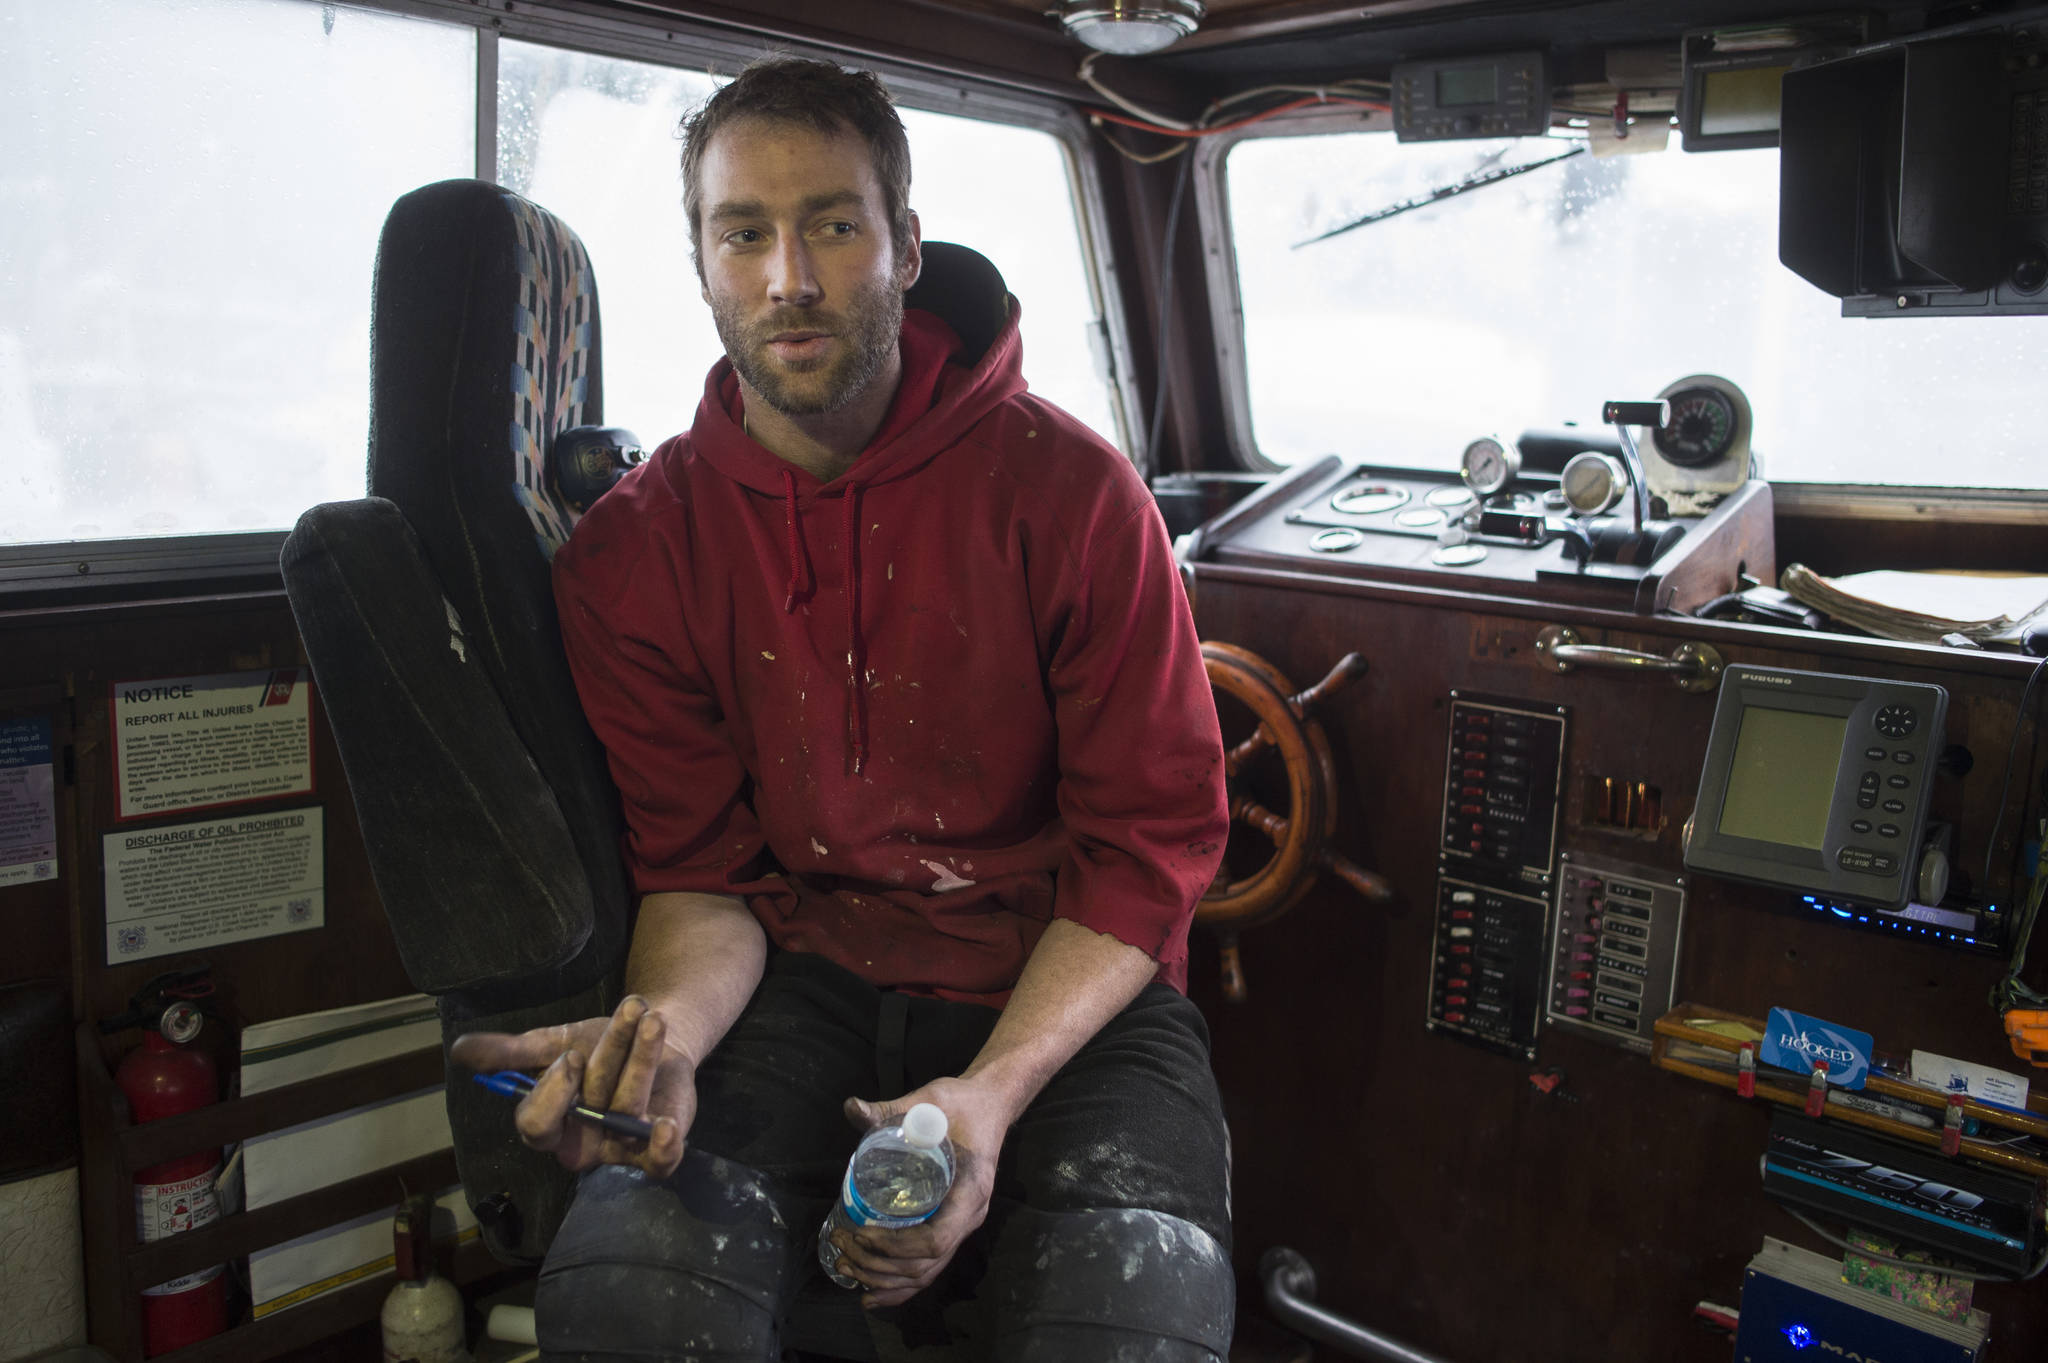 Clayton Hamilton is one of five fishermen in the inaugural class of Fishing Fellows sponsored by the Alaska Marine Conservation Council in partnership with the Alaska Young Fishermen’s Network. (Michael Penn | Juneau Empire)